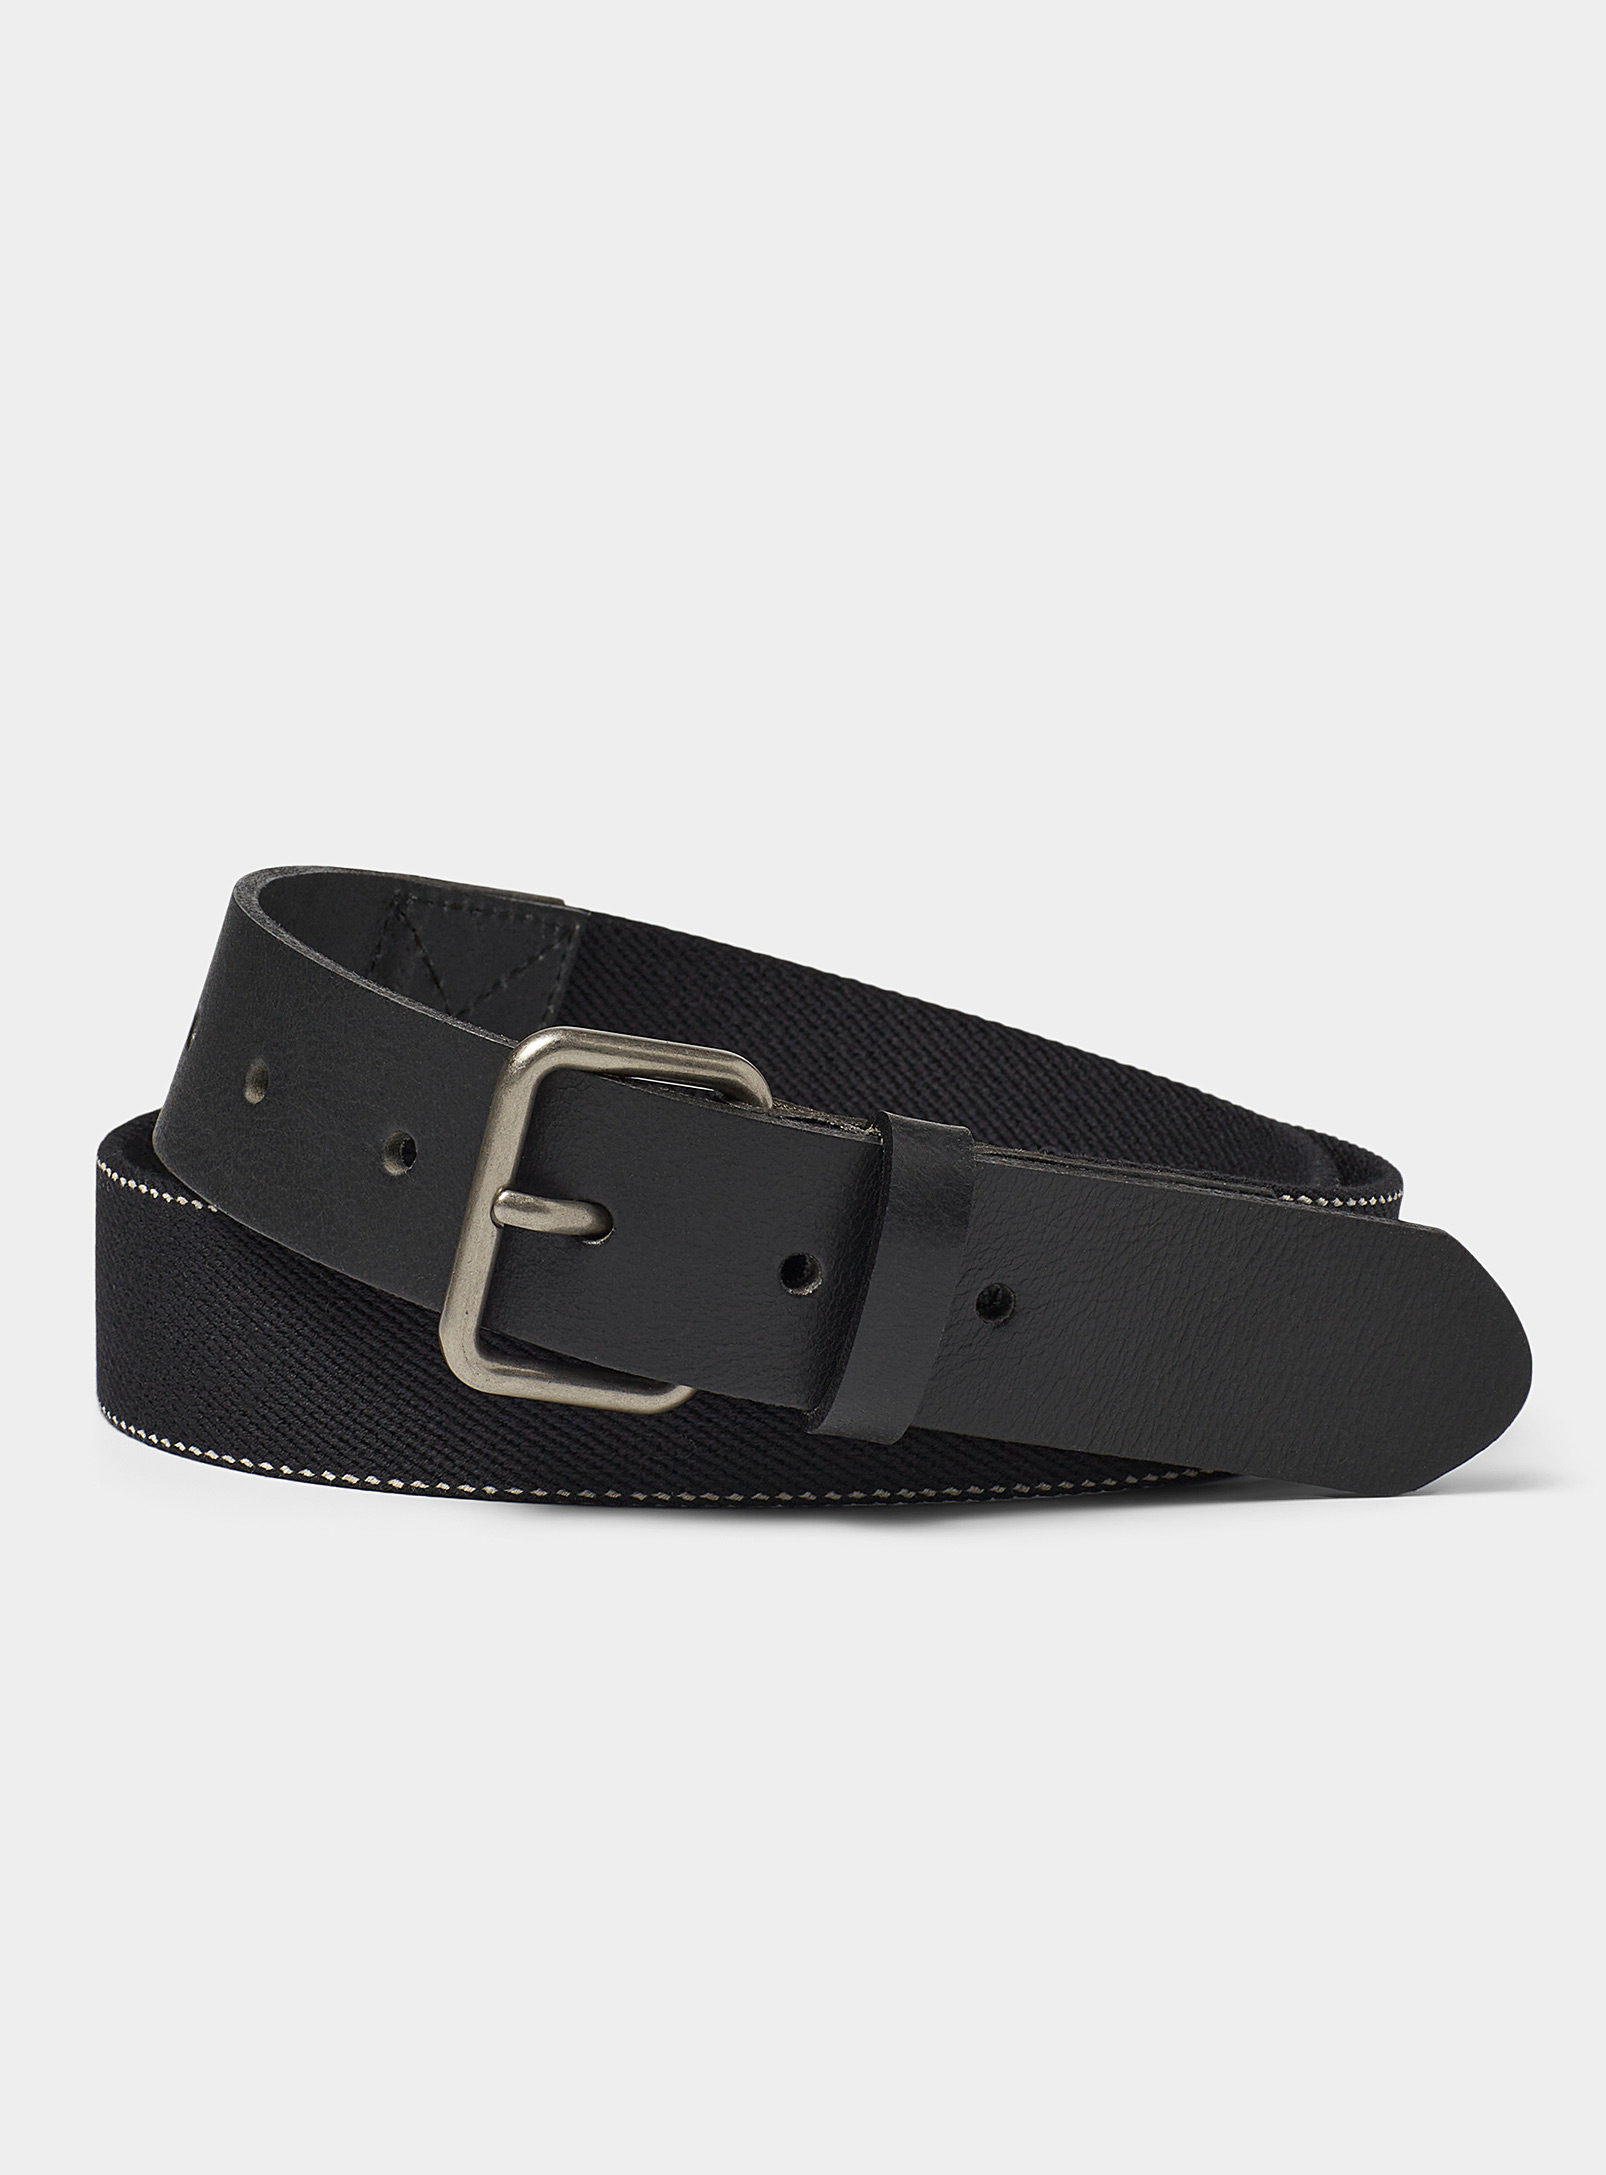 Le 31 Leather-accent Woven Belt Made In Canada In Black